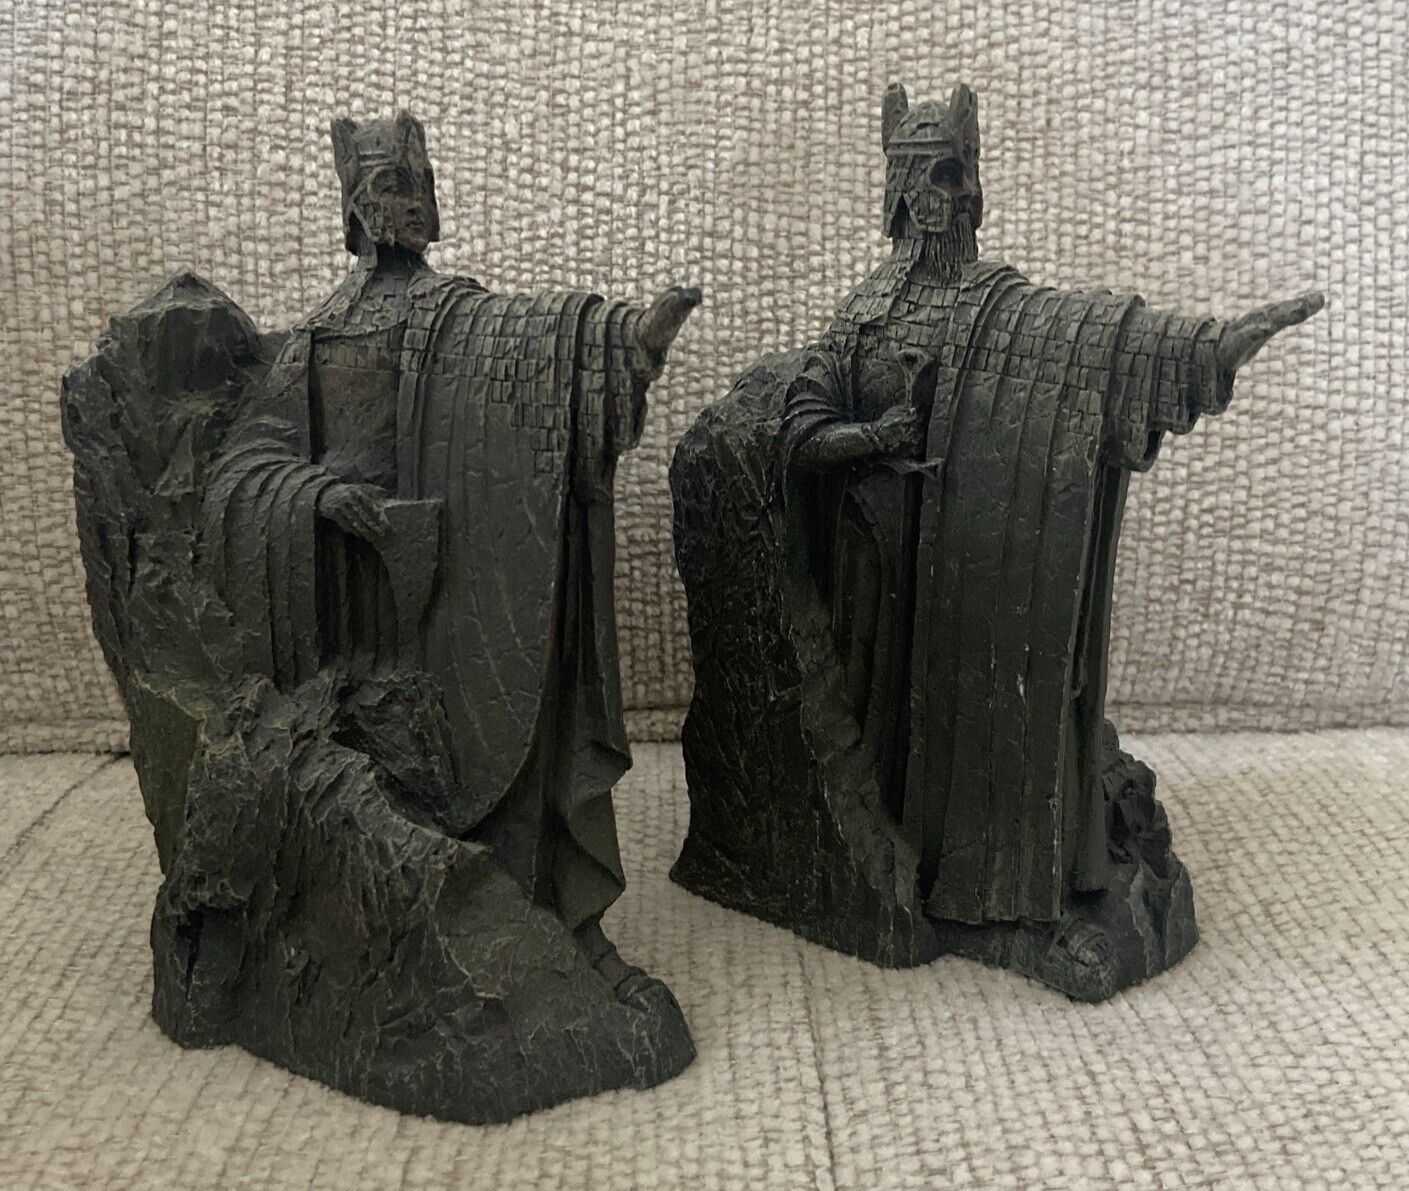 Lord of The Rings Argonath Statue Bookends- MacLachlan, Sideshow Weta 2002 READ